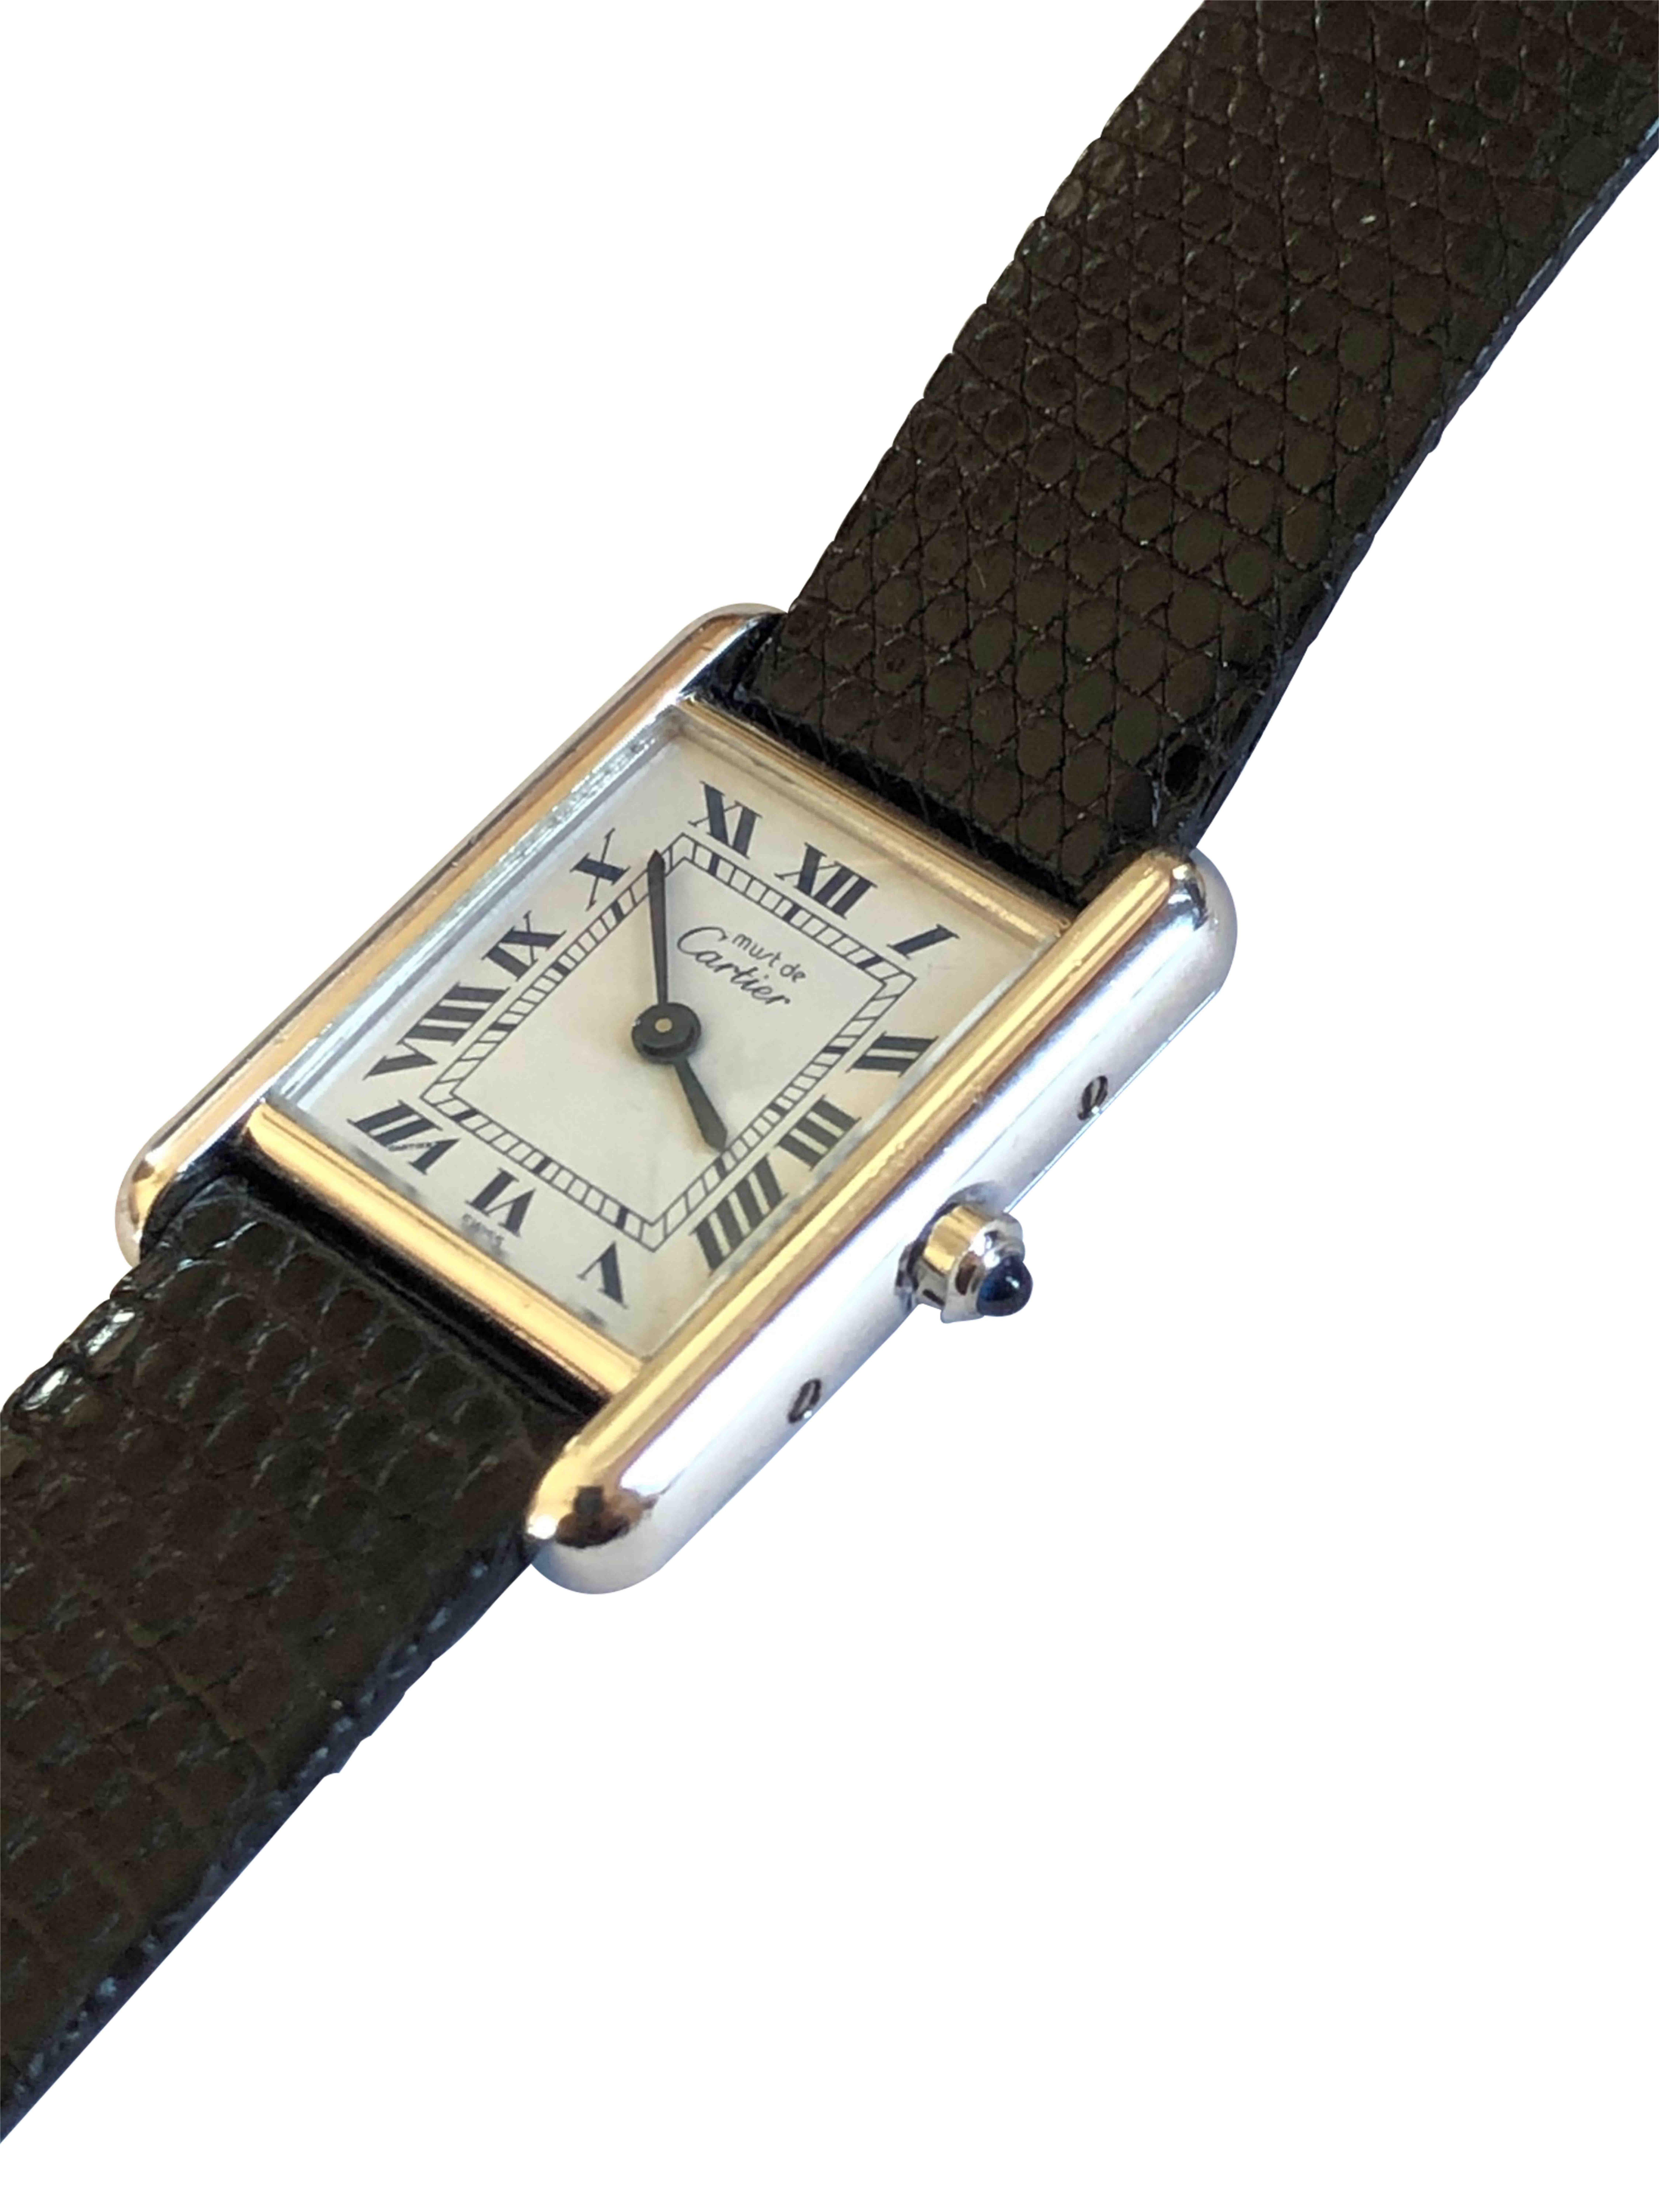 Circa 2000 Cartier Classic Tank Ladies Wrist Watch, 27 X 21 MM Sterling Silver 2 Piece Case. Quartz Movement, White Dial with Dark Blue Roam Numerals. Black Lizard strap with original Cartier Tang Buckle. Comes in a Cartier Suede travel pouch.